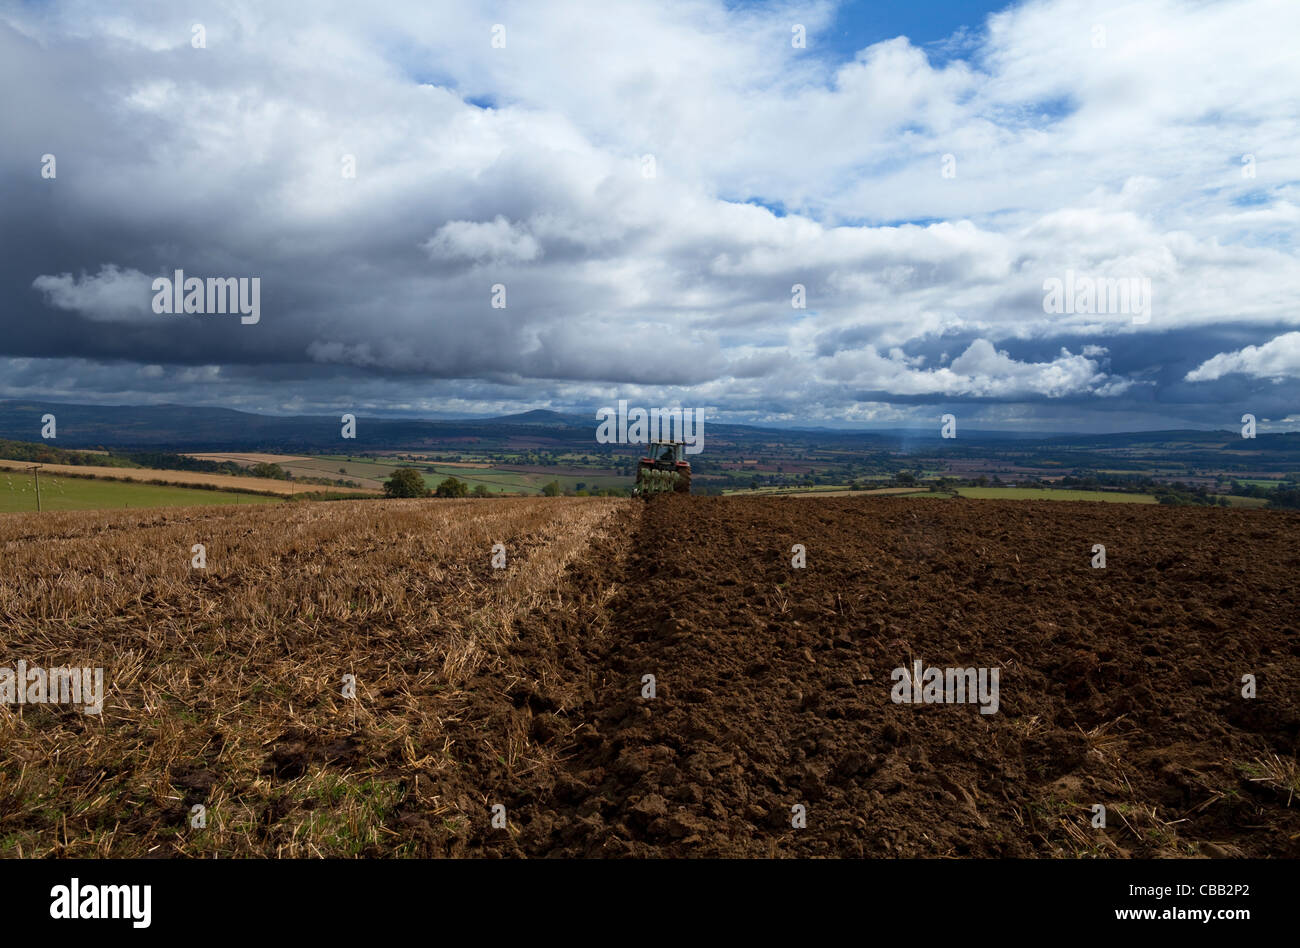 Tillage, Tractor ploughing near Craven Arms, Shropshire, England, UK Stock Photo